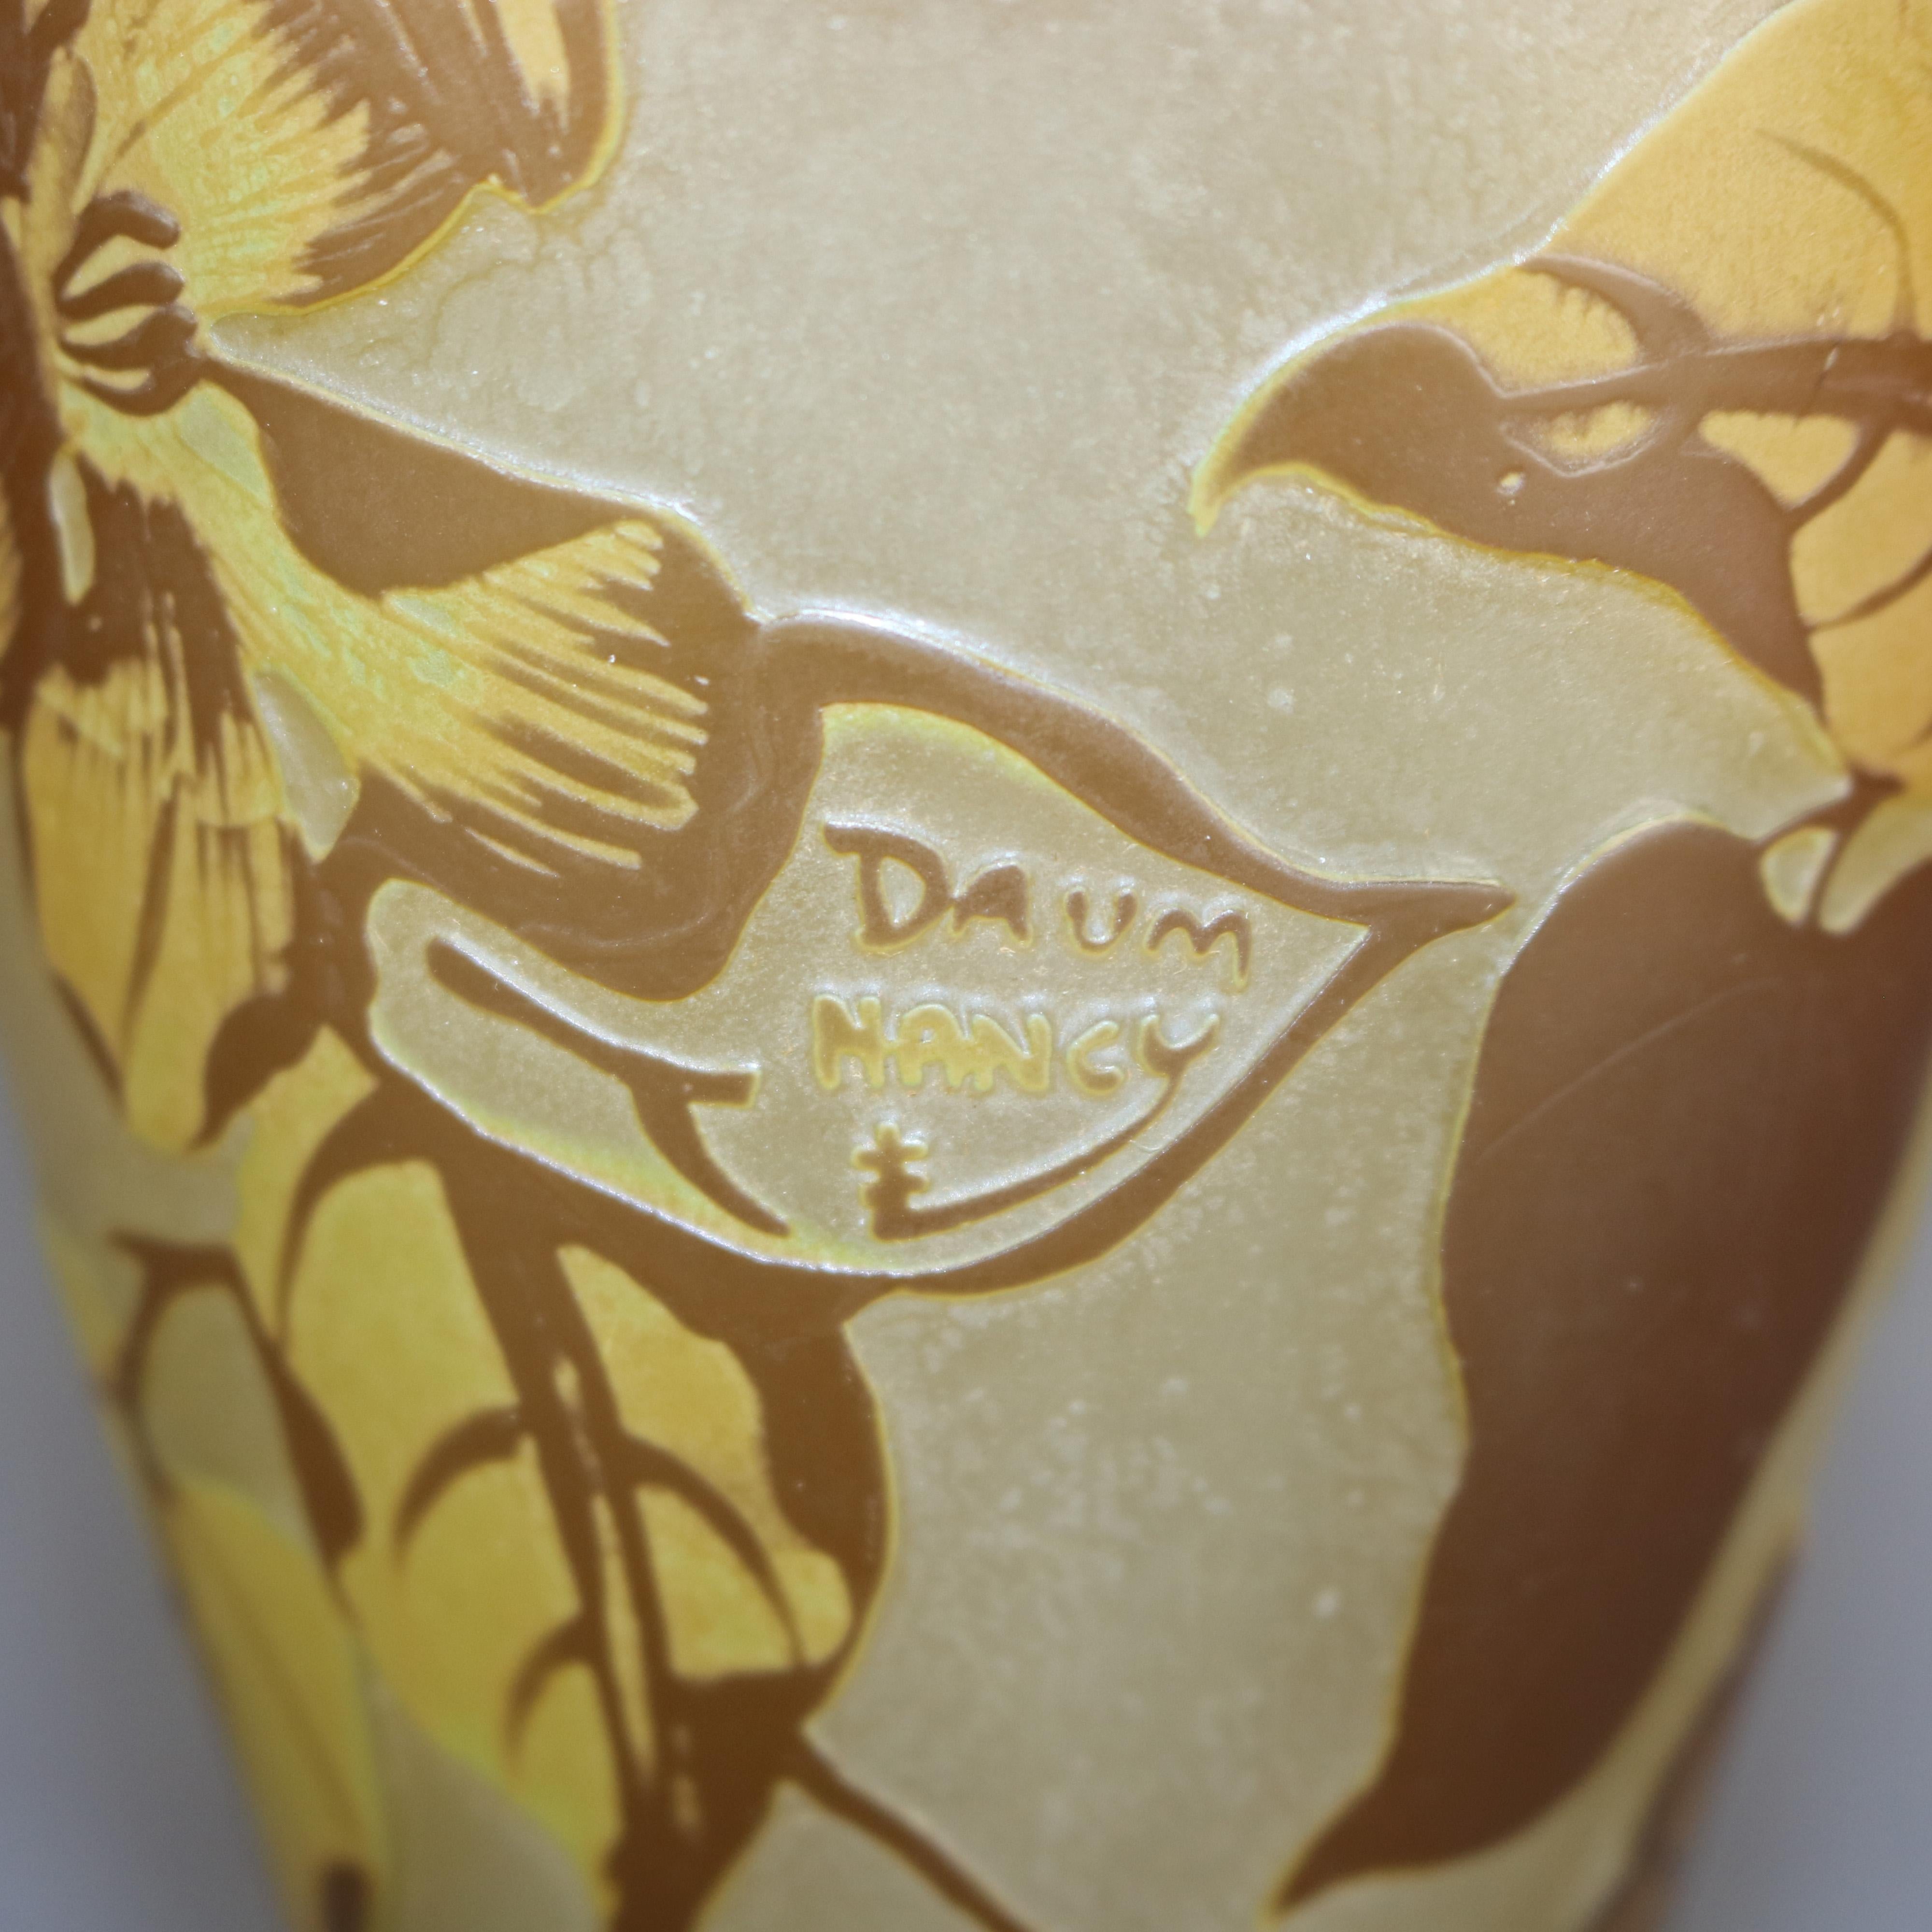 An antique French Art Nouveau art glass vase by Daum Nancy offers hourglass form having cameo cutback allover floral Dogwood design, signed on leaf as photographed, c1900.

Measures: 16.75